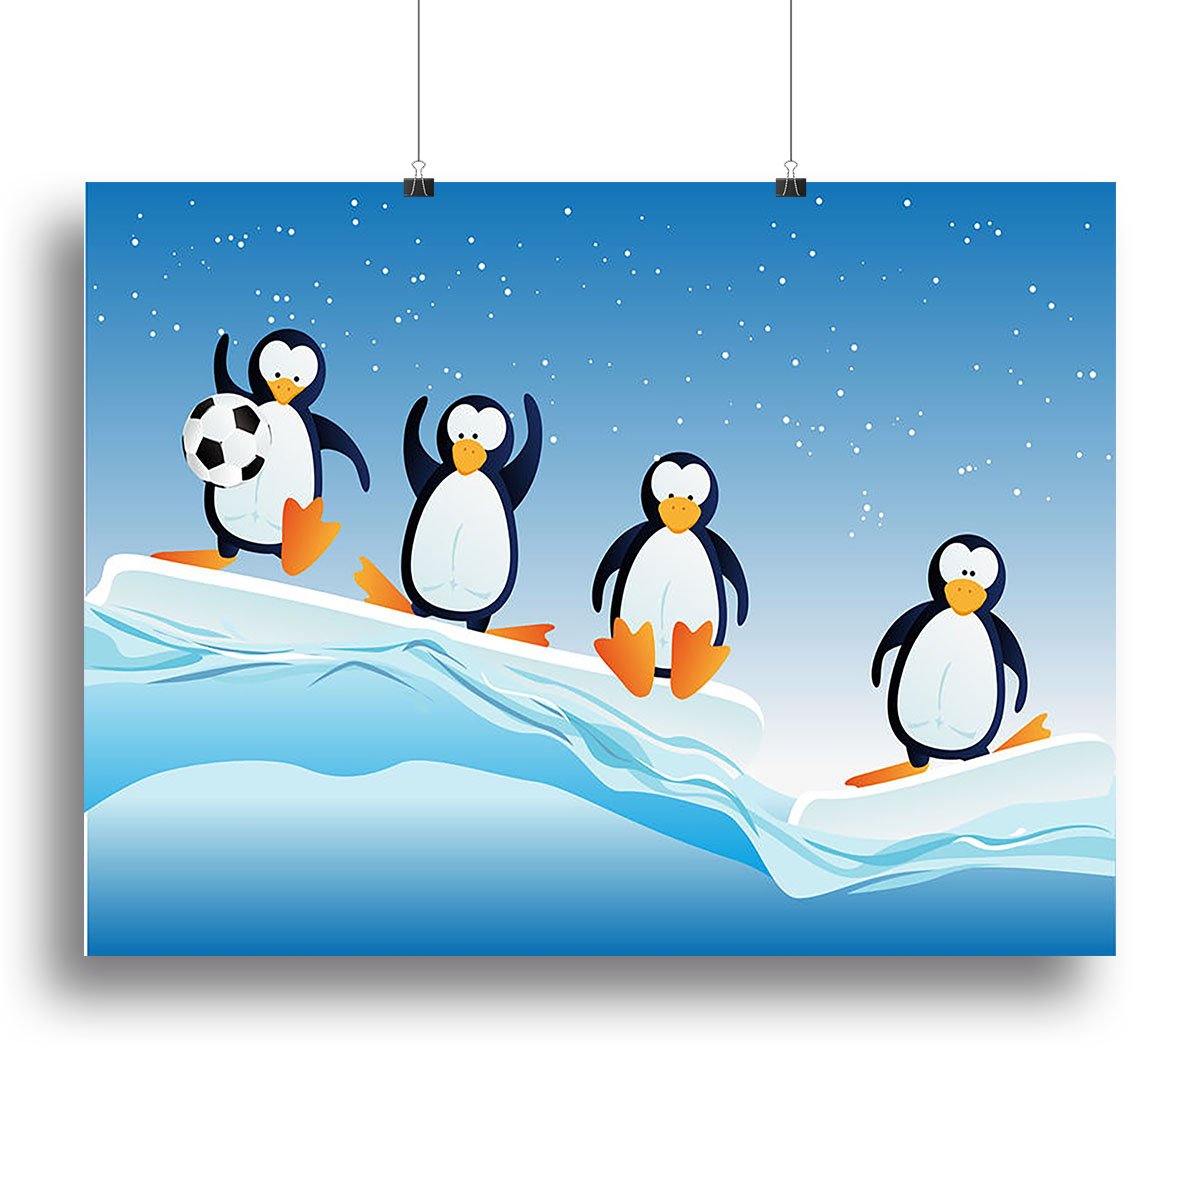 Cartoonstyle illustration of penguins Canvas Print or Poster